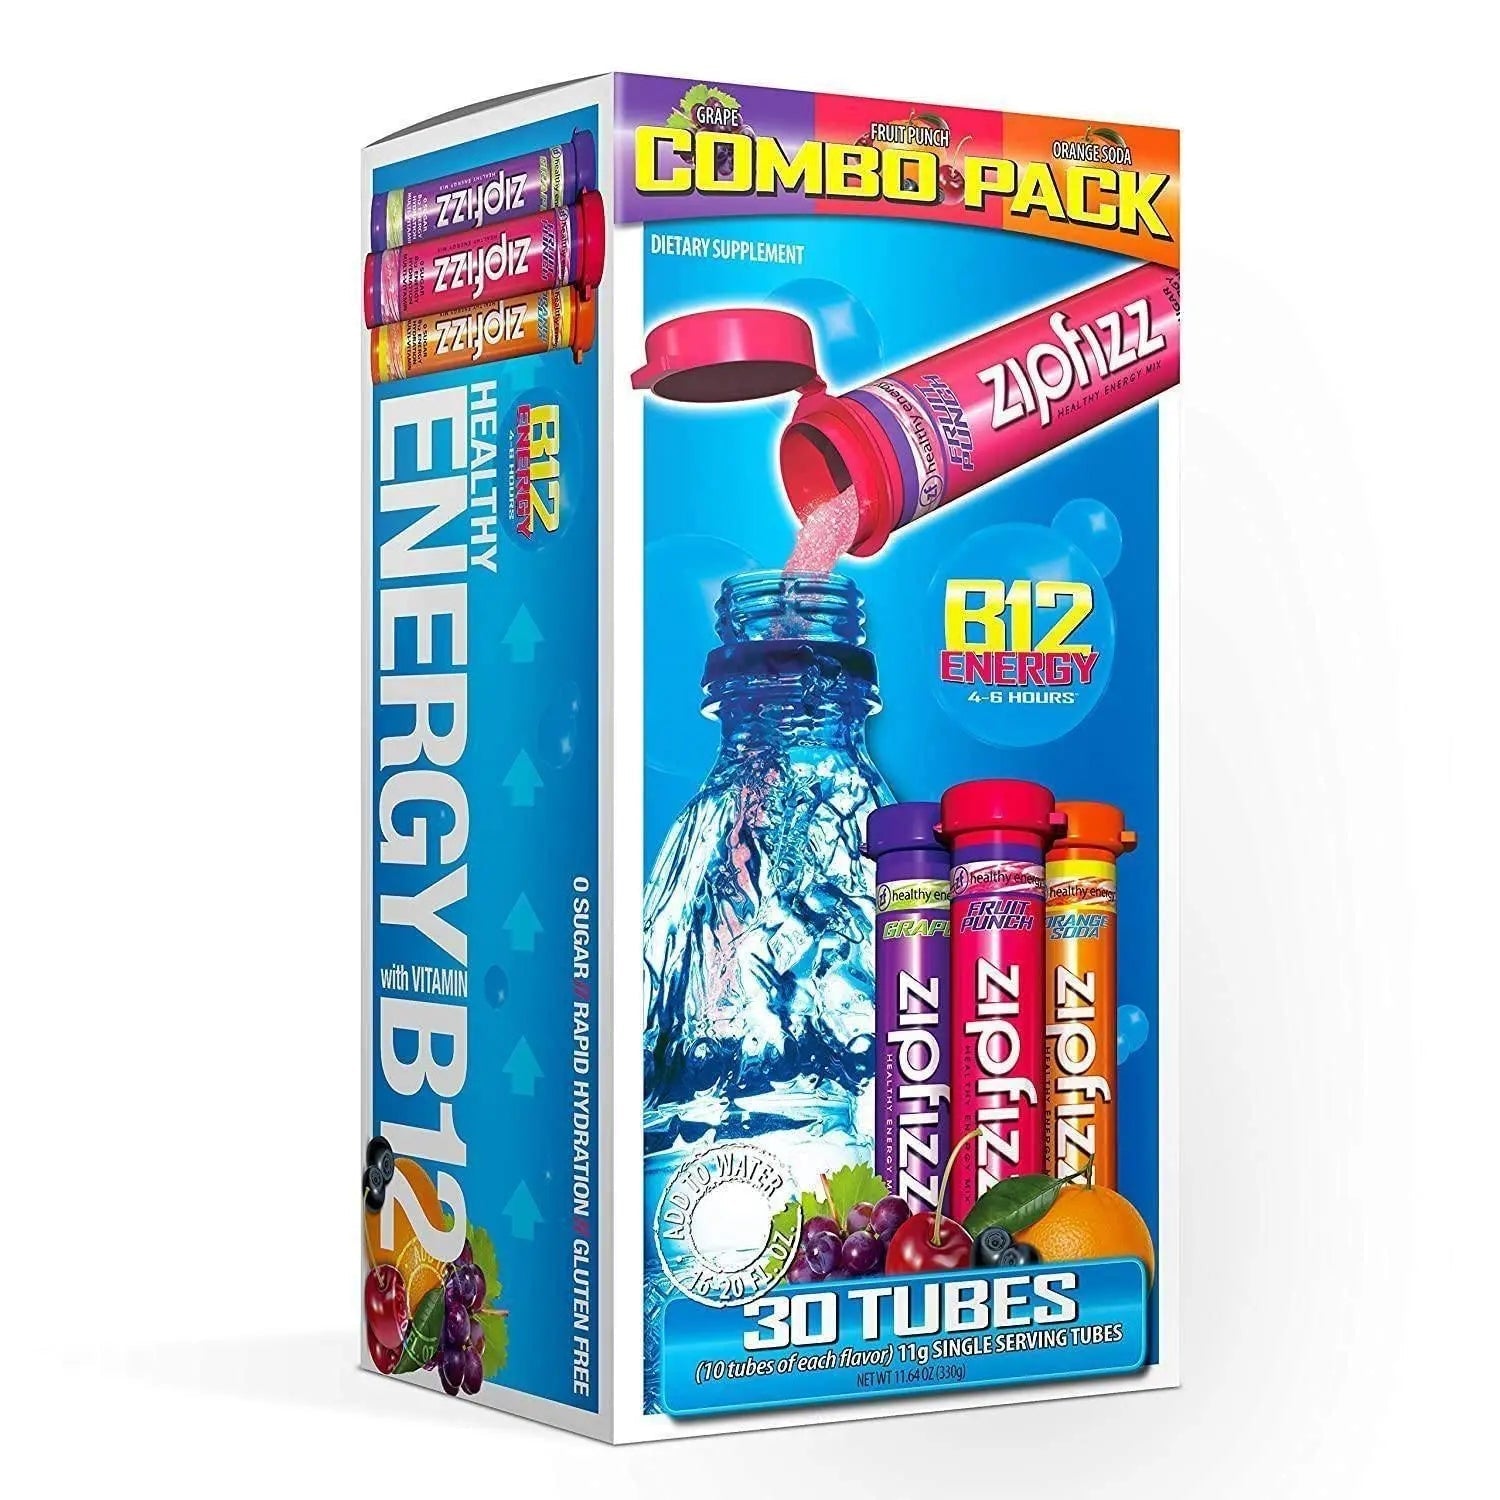 Wholesale prices with free shipping all over United States Zipfizz Drink Mix Combo Pack (30 ct.) - Steven Deals